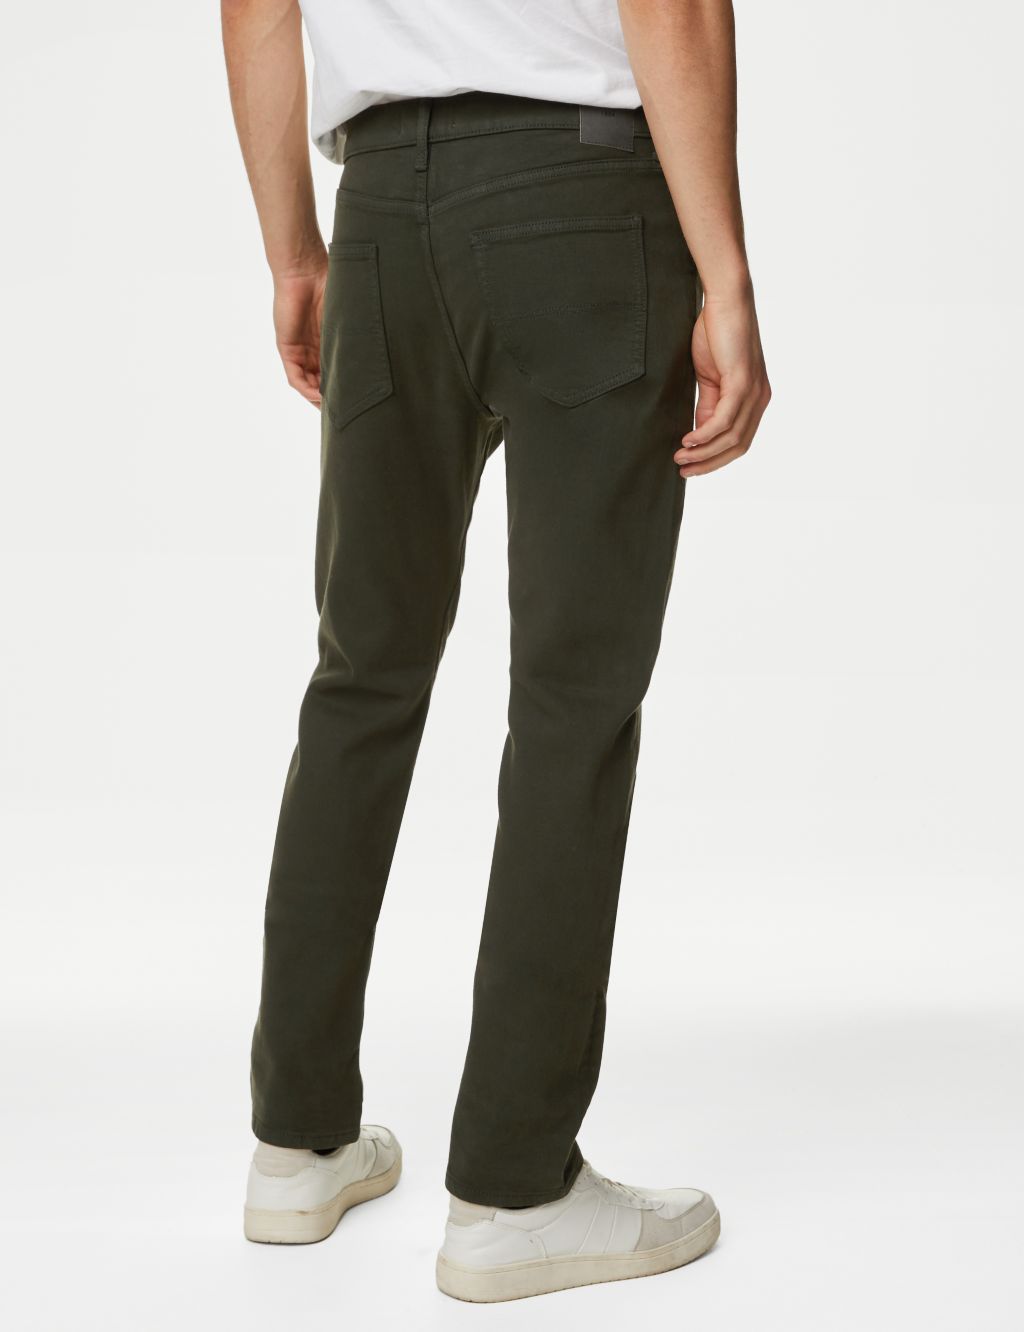 Slim Fit Tea Dyed Stretch Jeans image 5